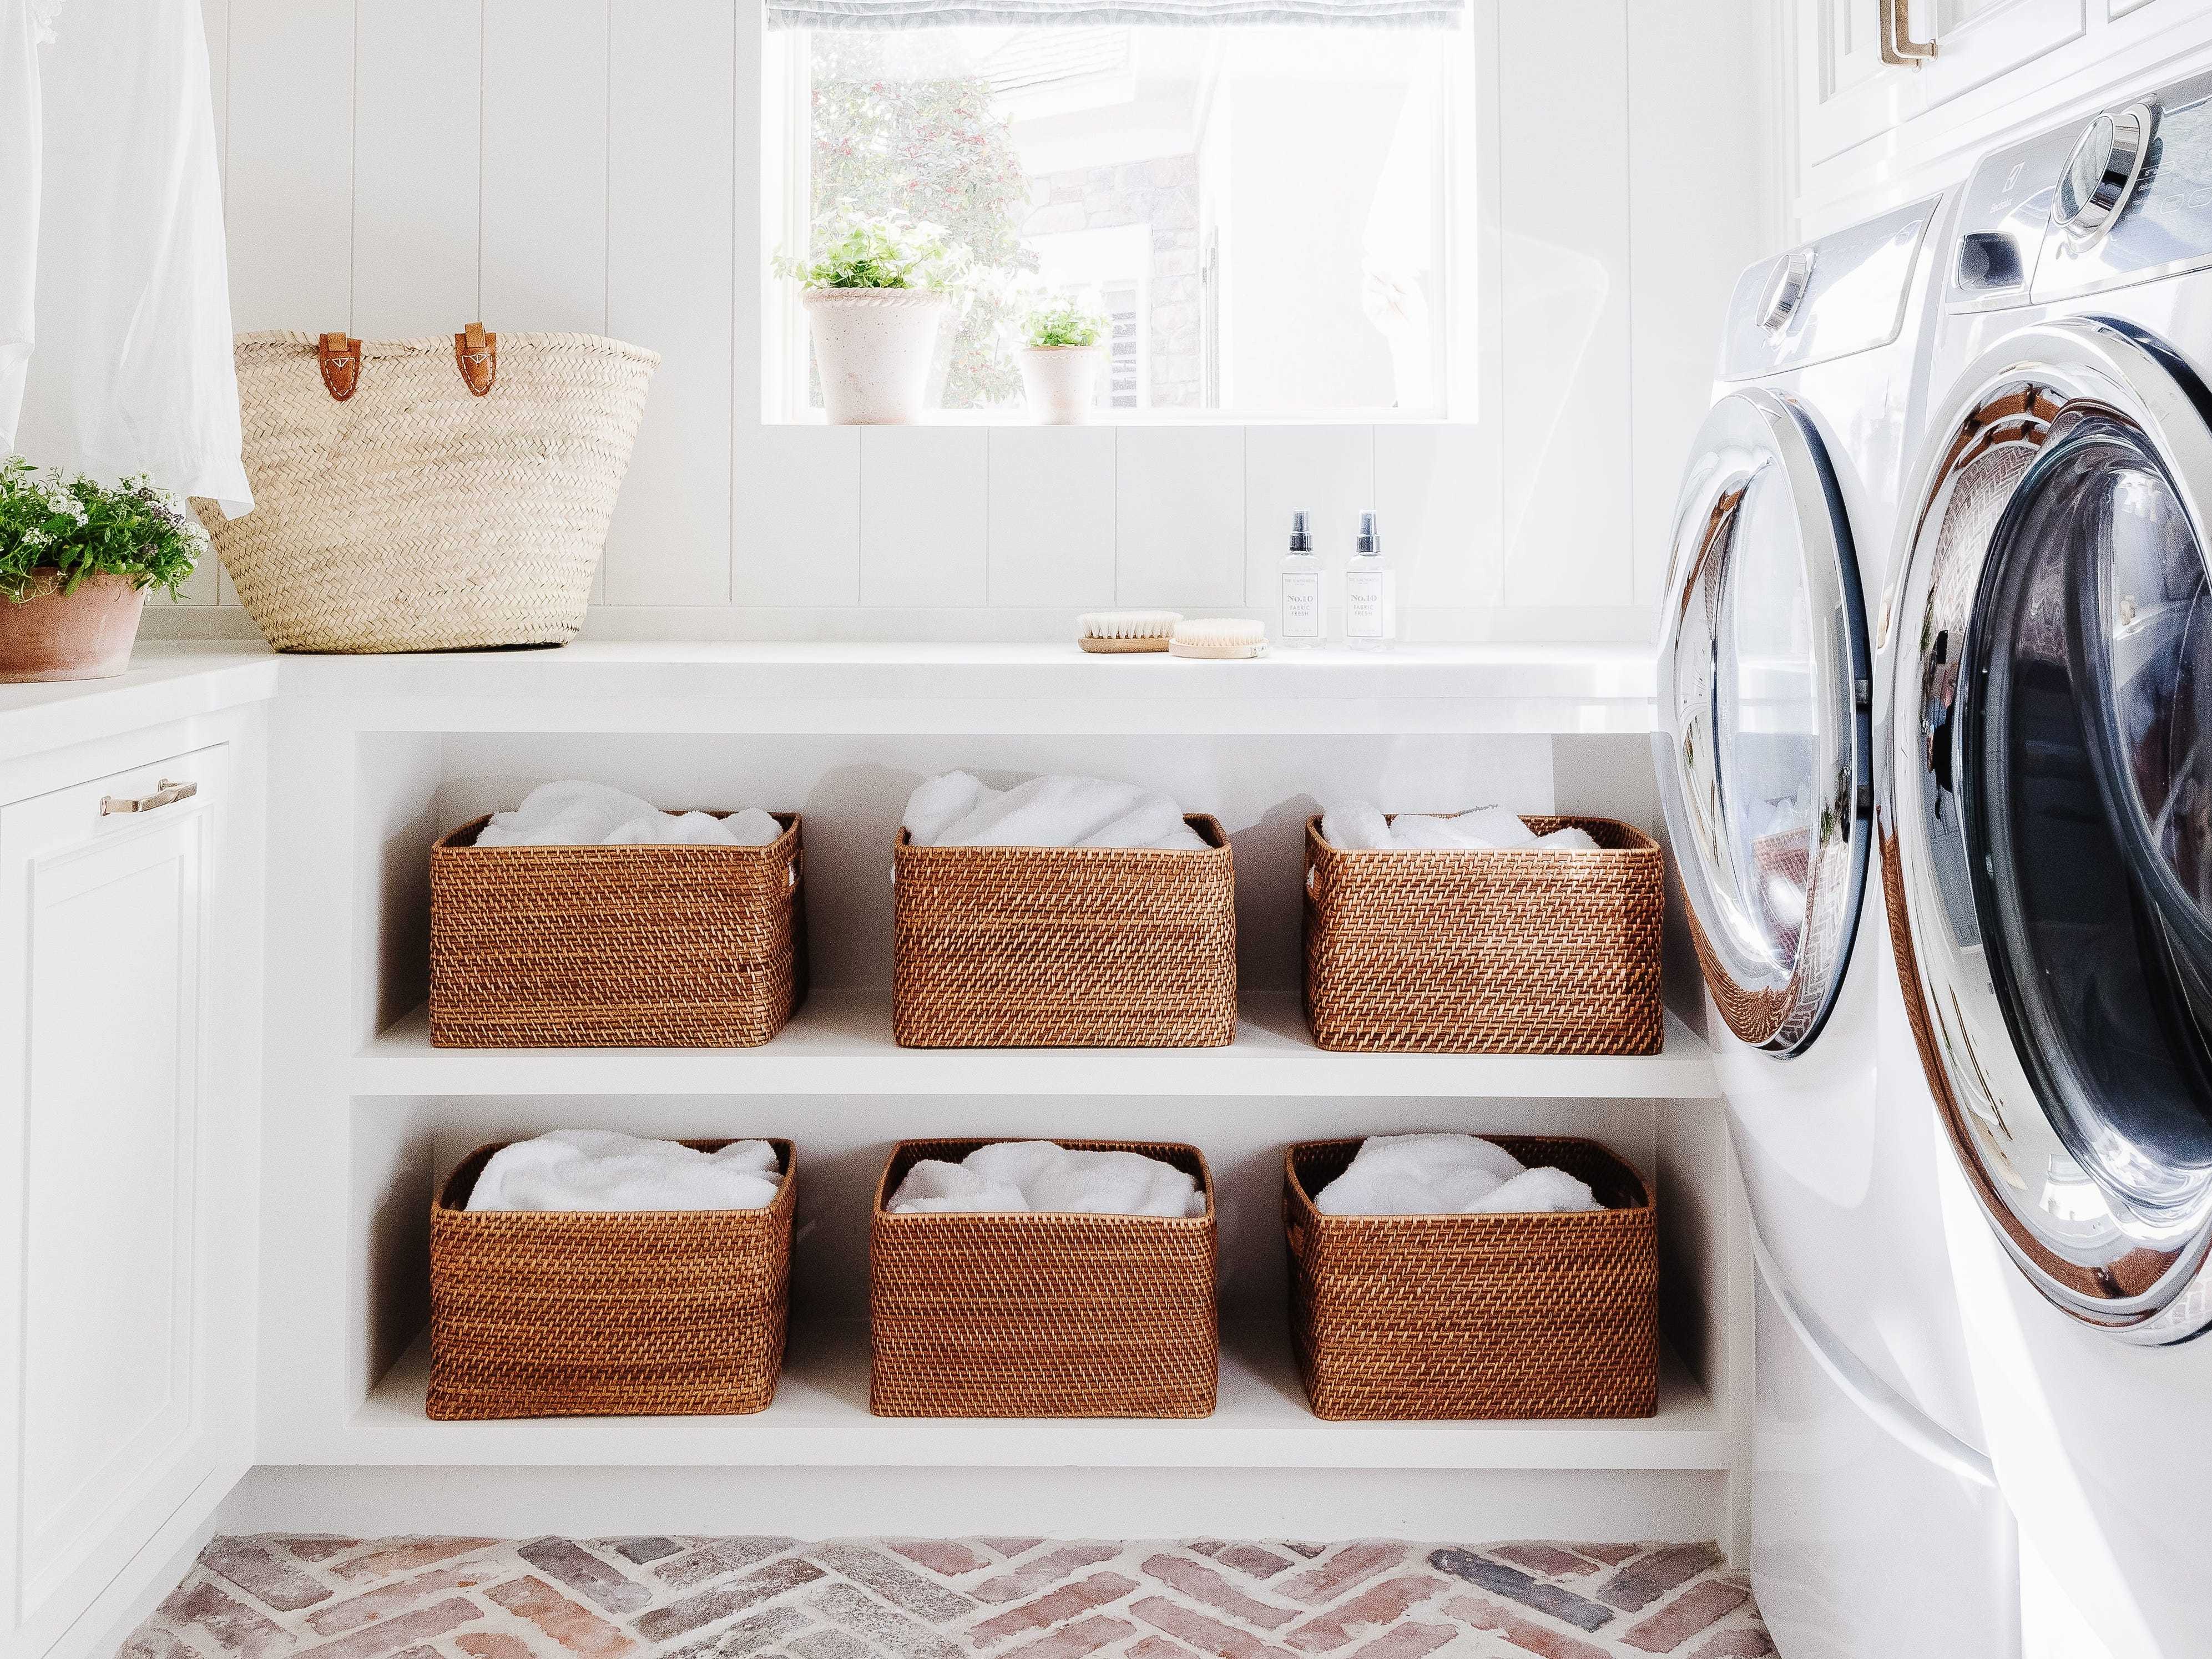 A white laundry room with shelving and baskets.